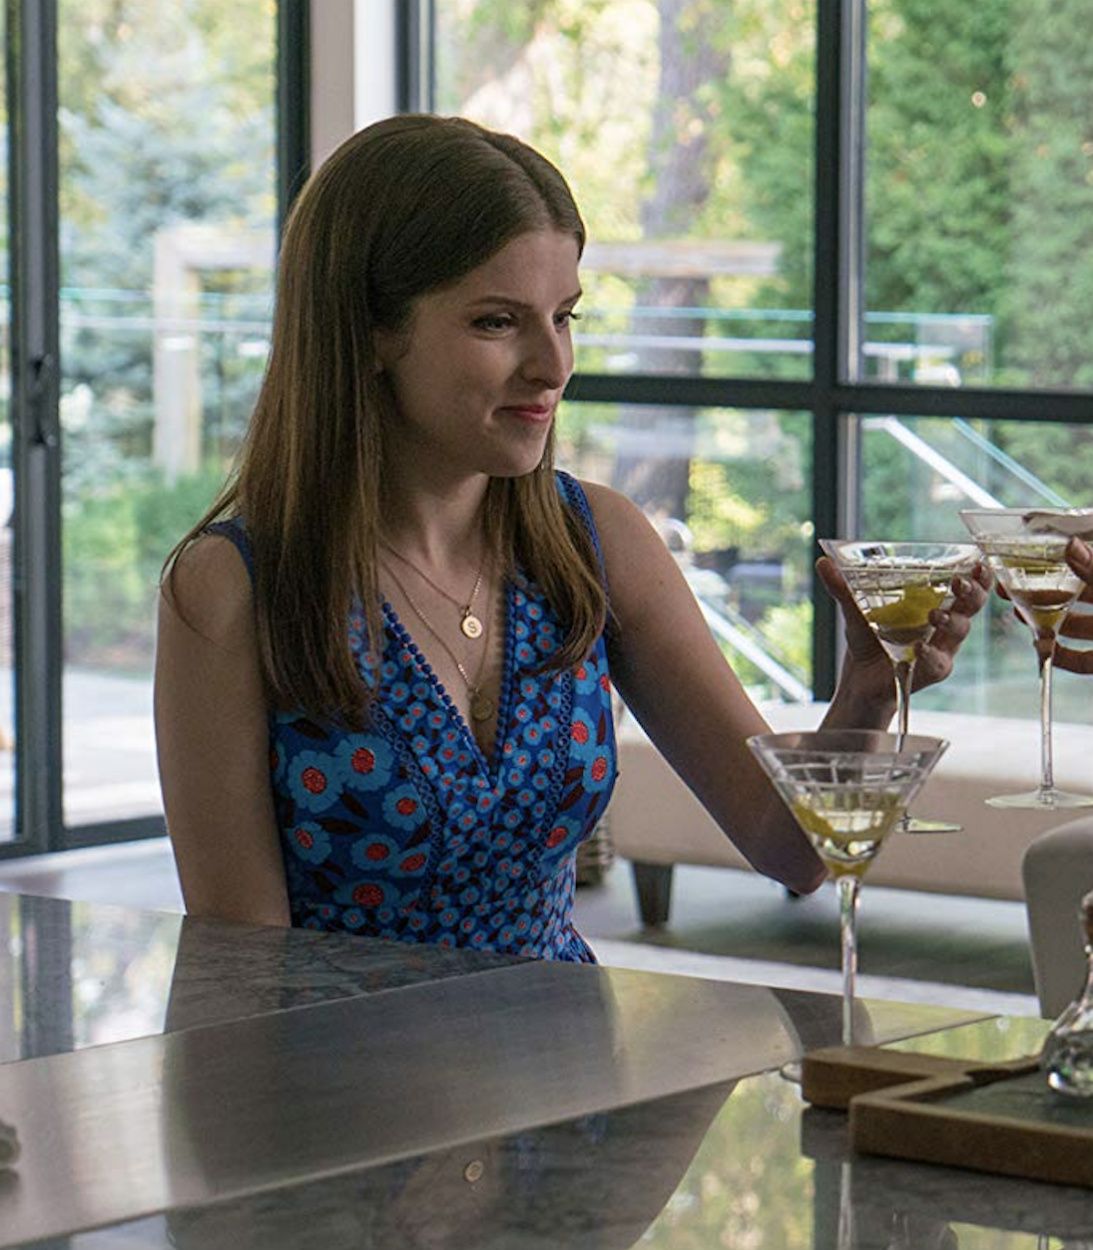 Anna Kendrick in A Simple Favor